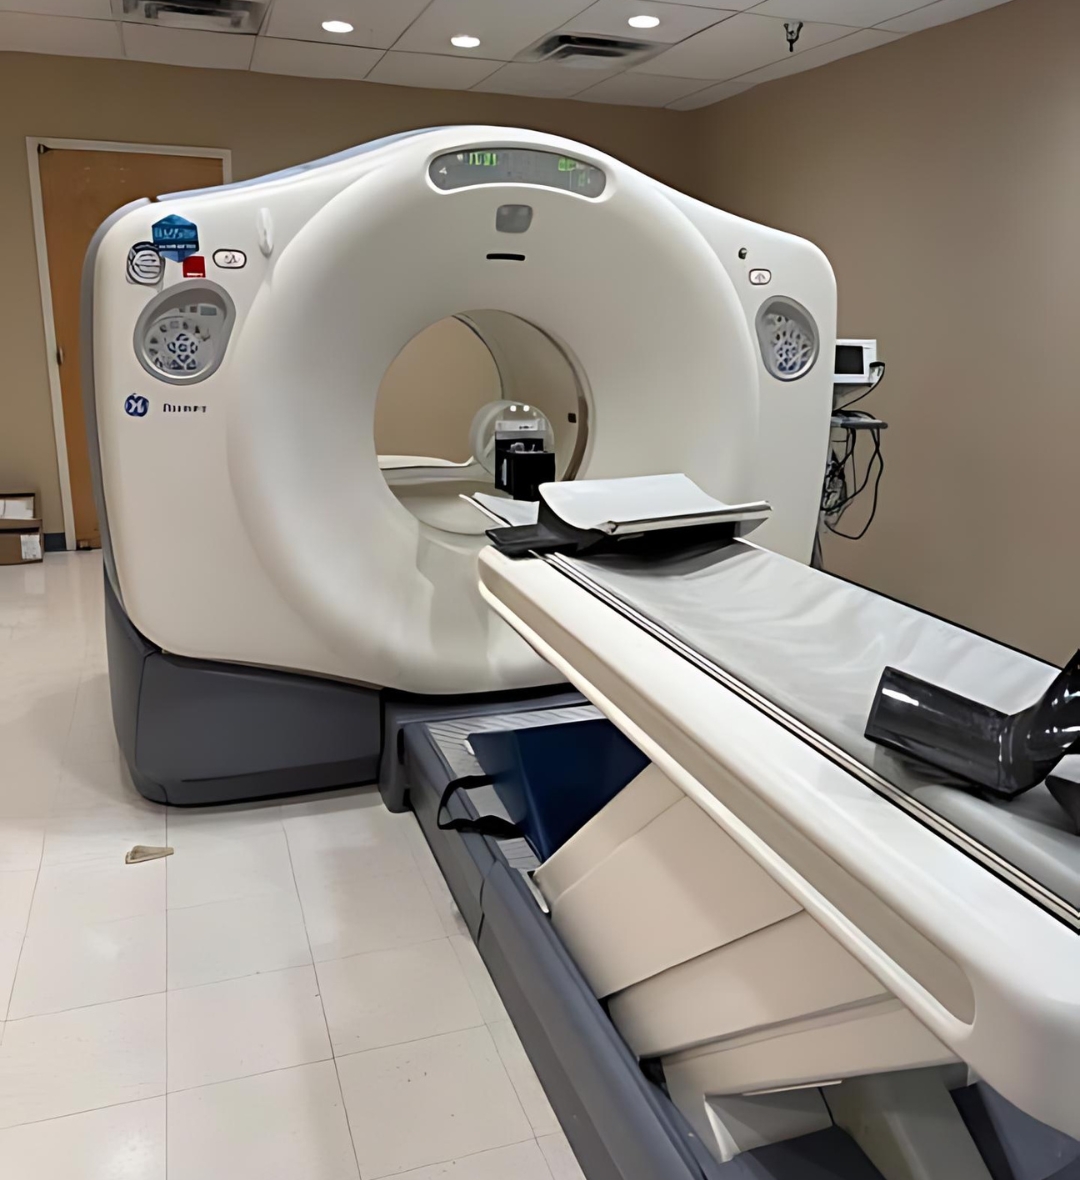 2009 GE DISCOVERY ST 16 PET/CT Scanner